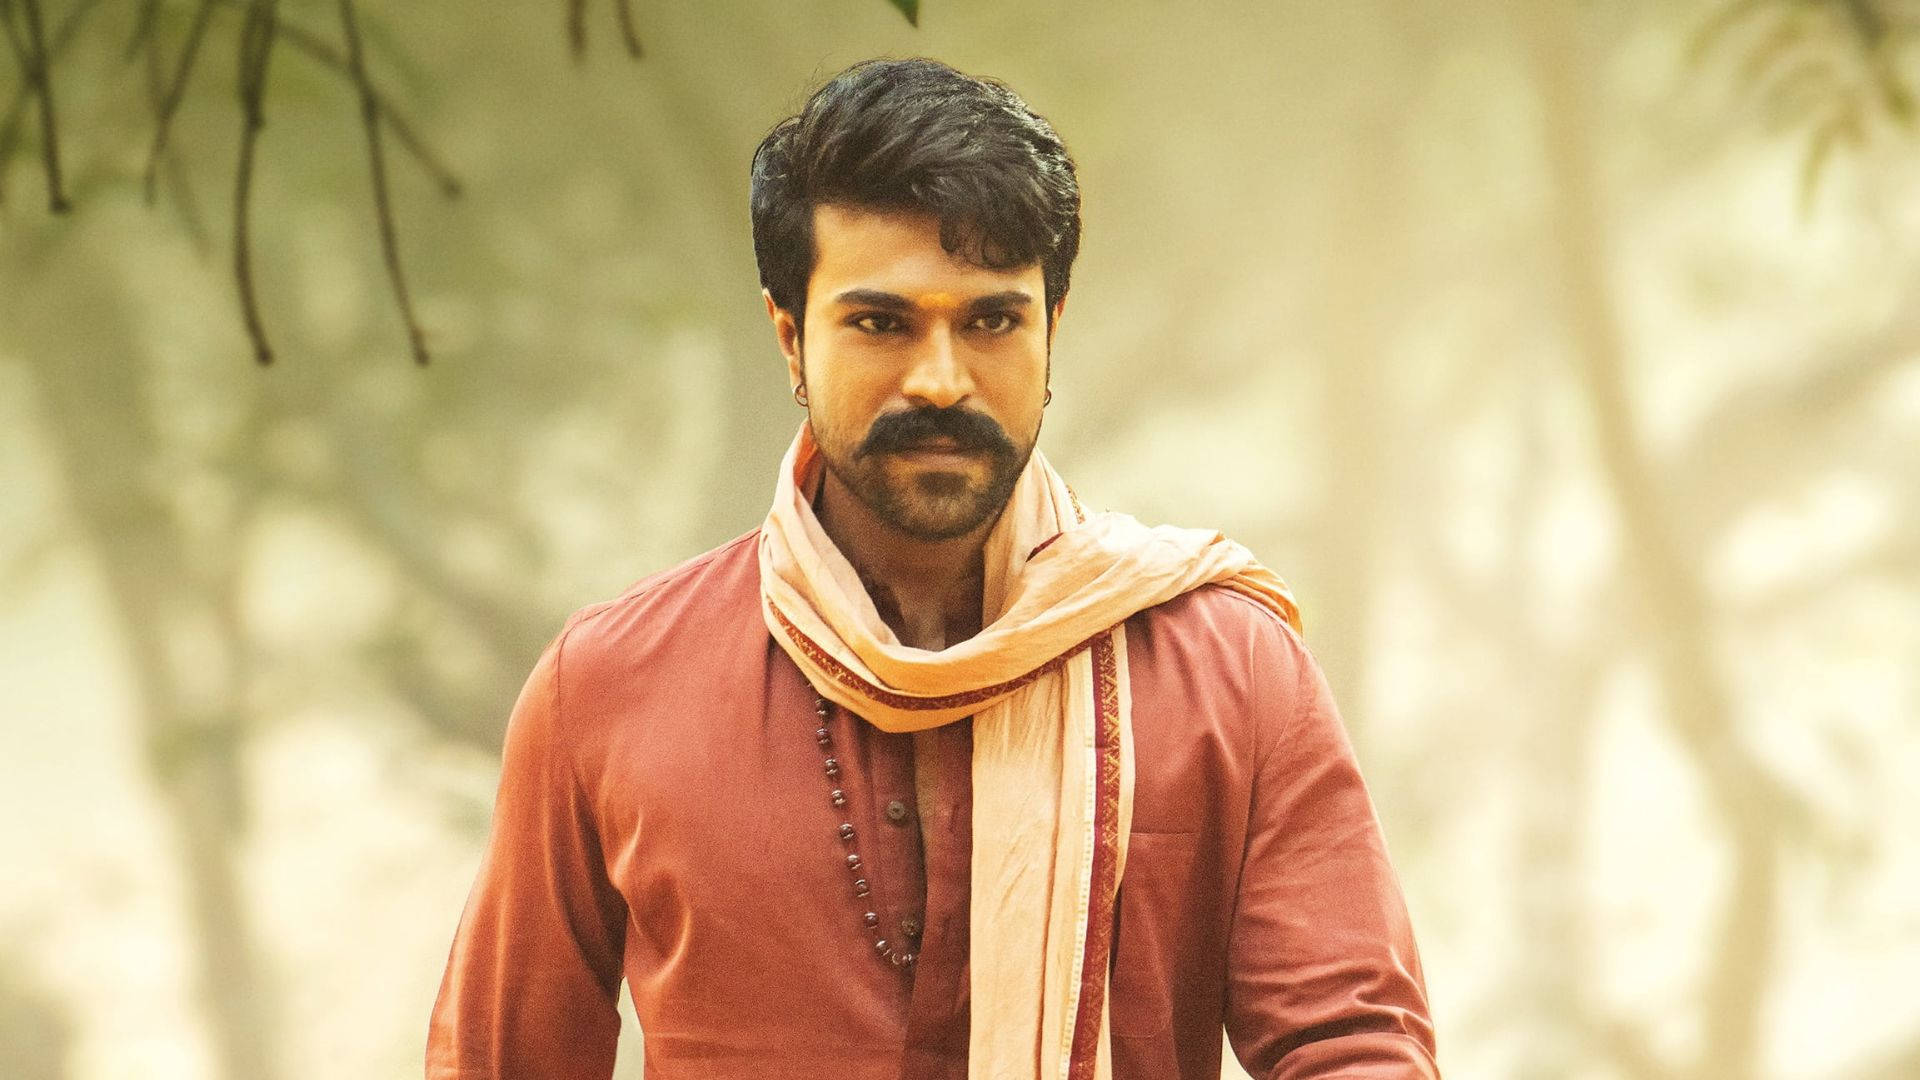 Ram Charan Hd In Traditional Indian Clothes Wallpaper